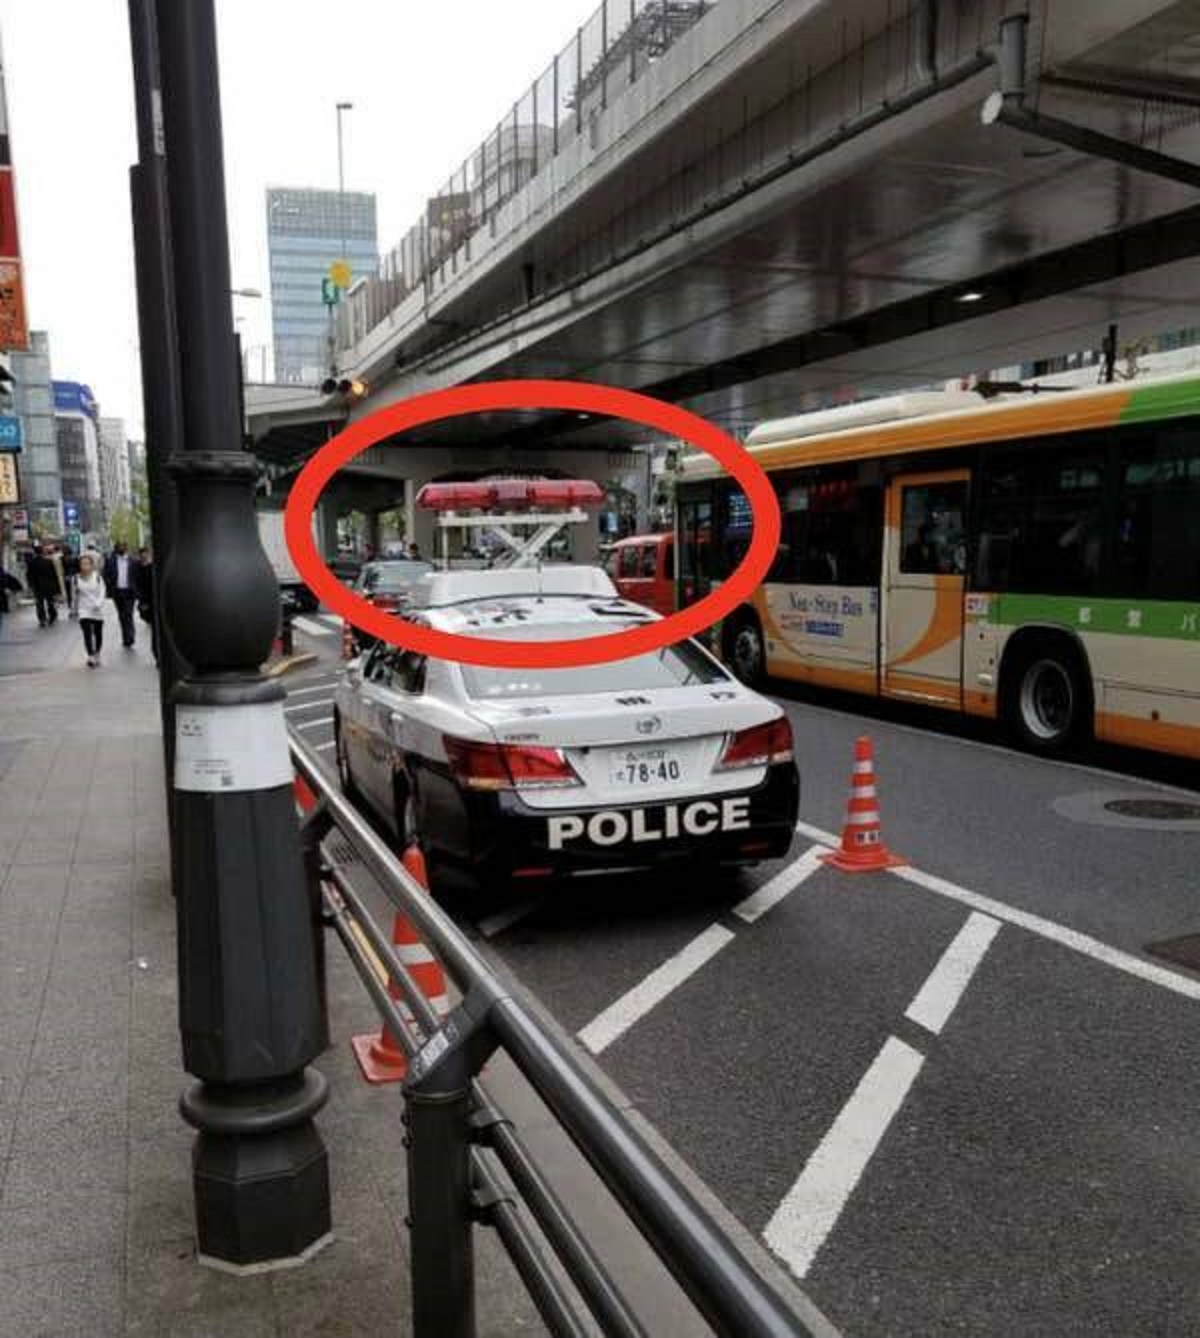 Police cars in Japan can raise their blinking lights so it's easier for people to see them above other cars.